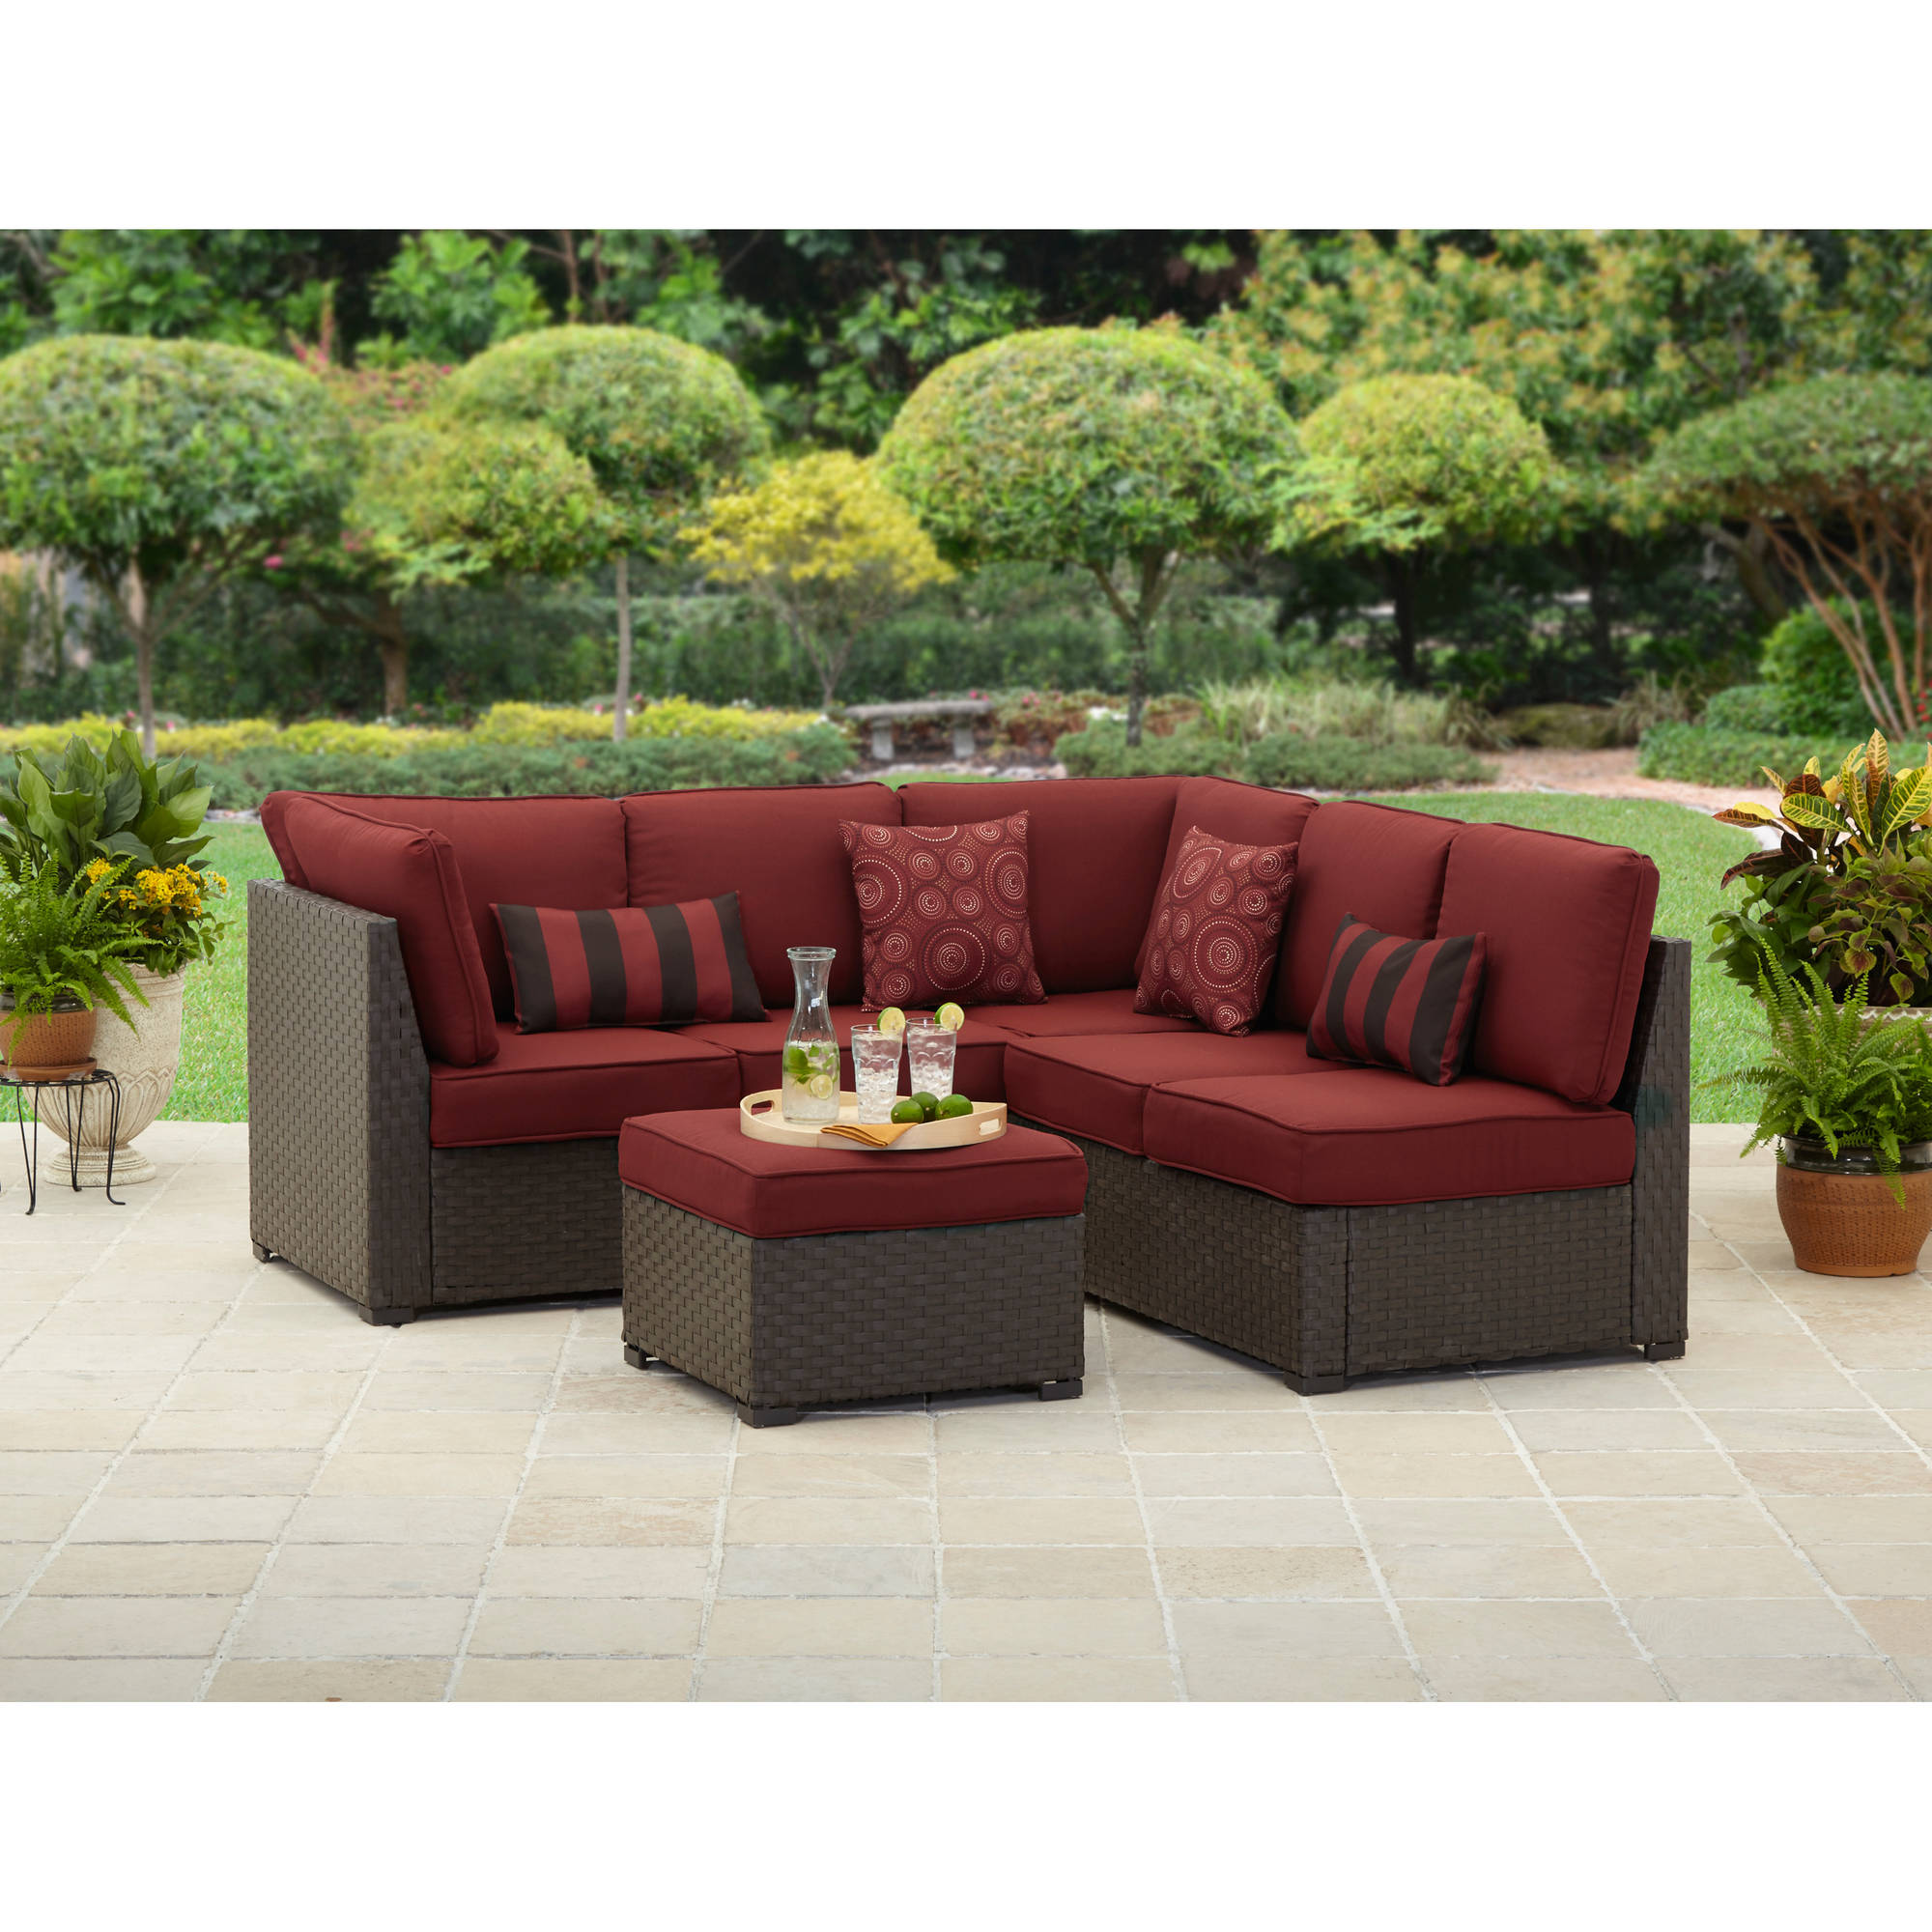 outdoor sectional sofa better homes and gardens rush valley 3-piece outdoor sectional - walmart.com KNNDJHP